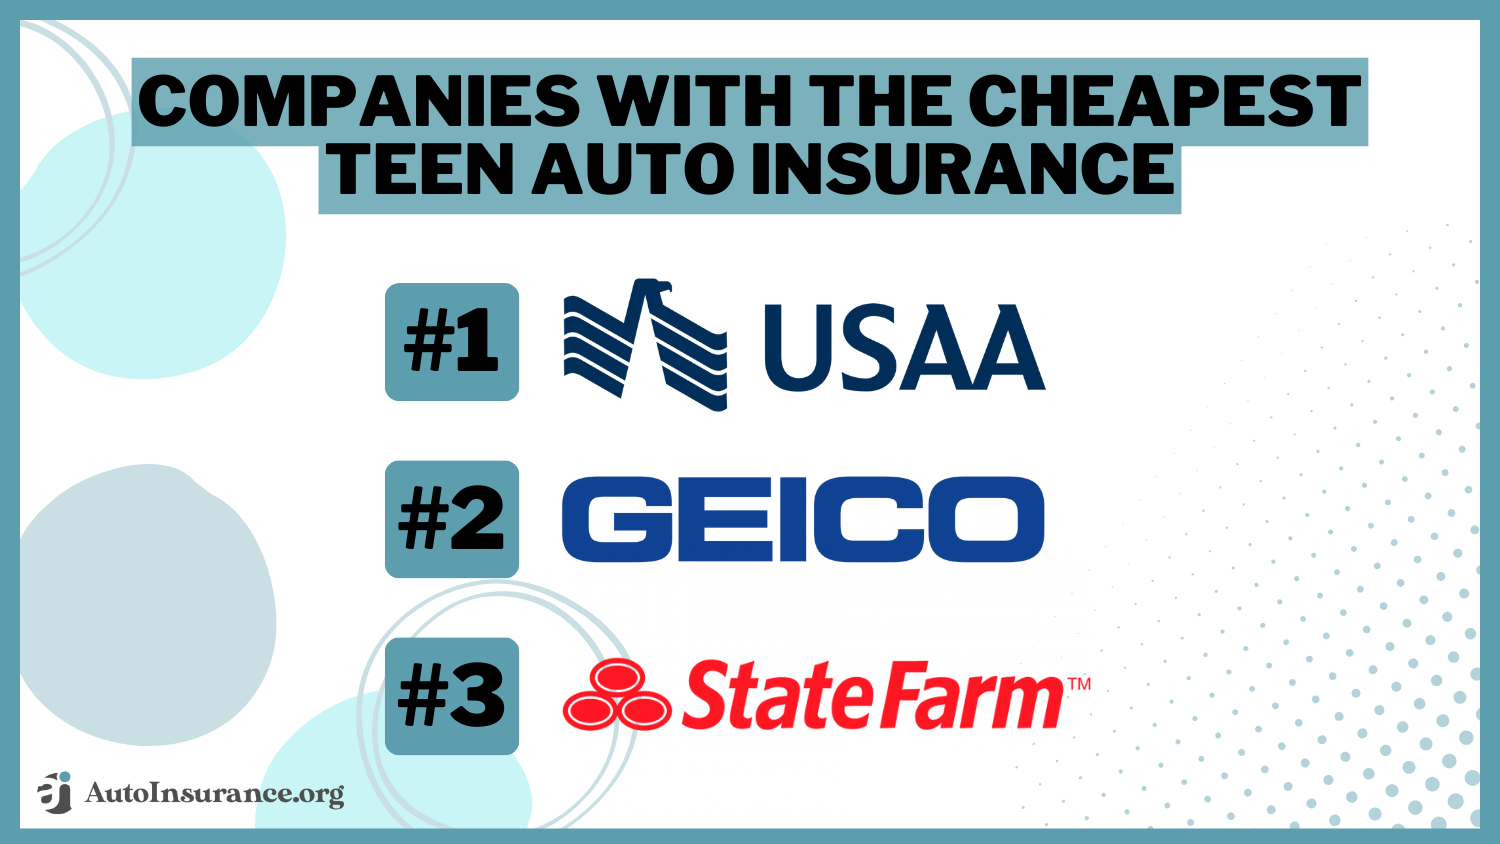 companies with the cheapest teen auto insurance: USAA, Geico, State Farm